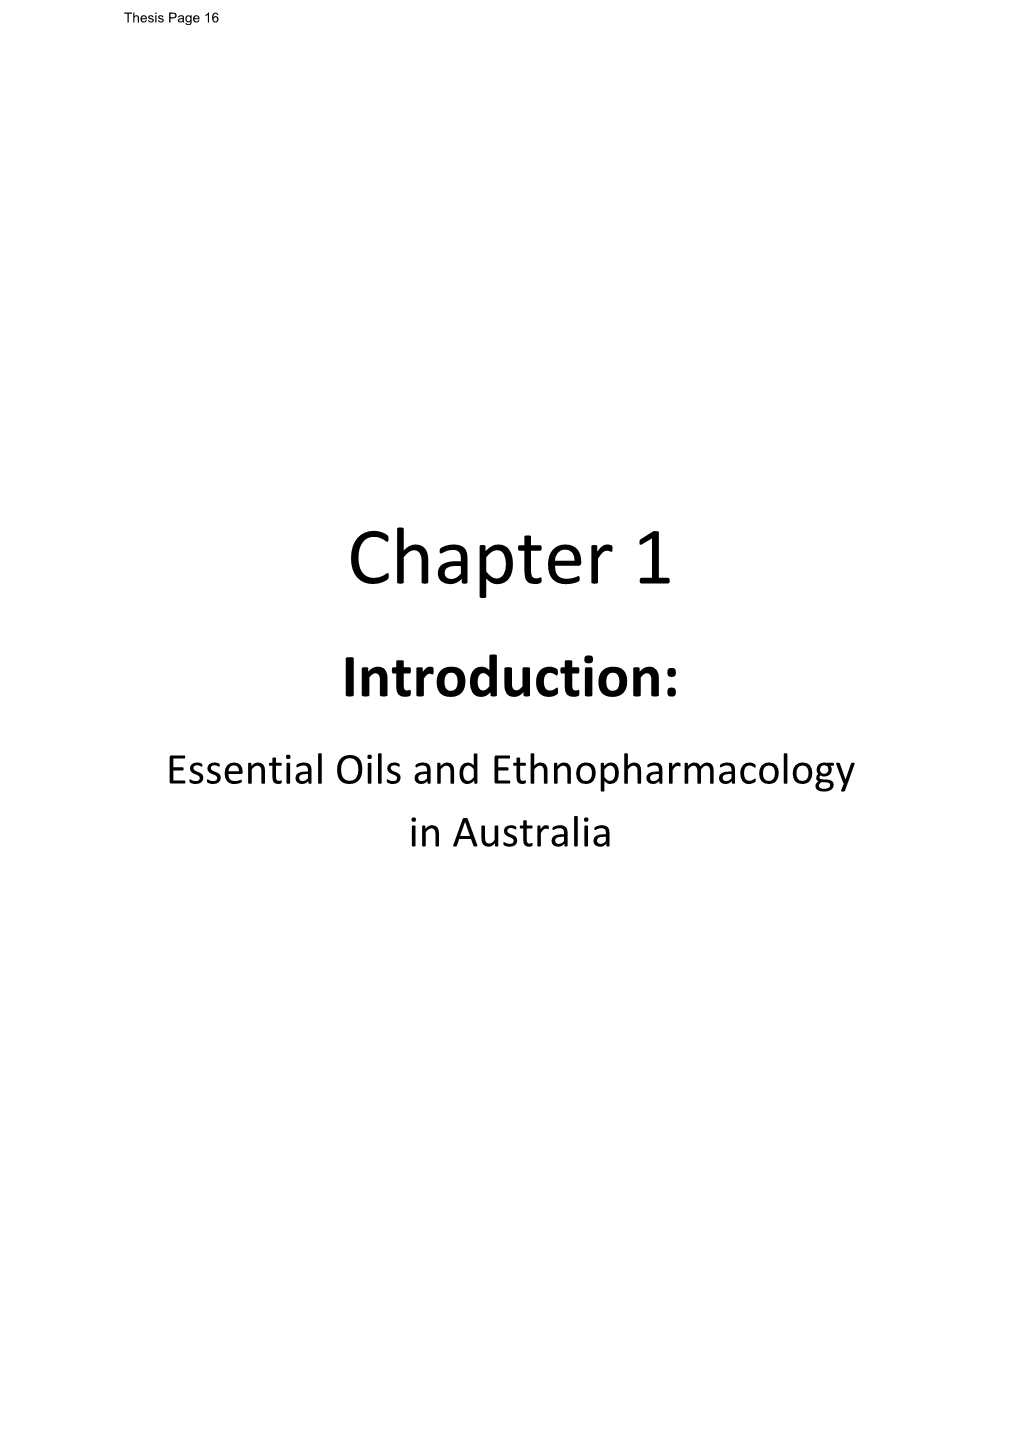 Chapter 1 Introduction: Essential Oils and Ethnopharmacology in Australia